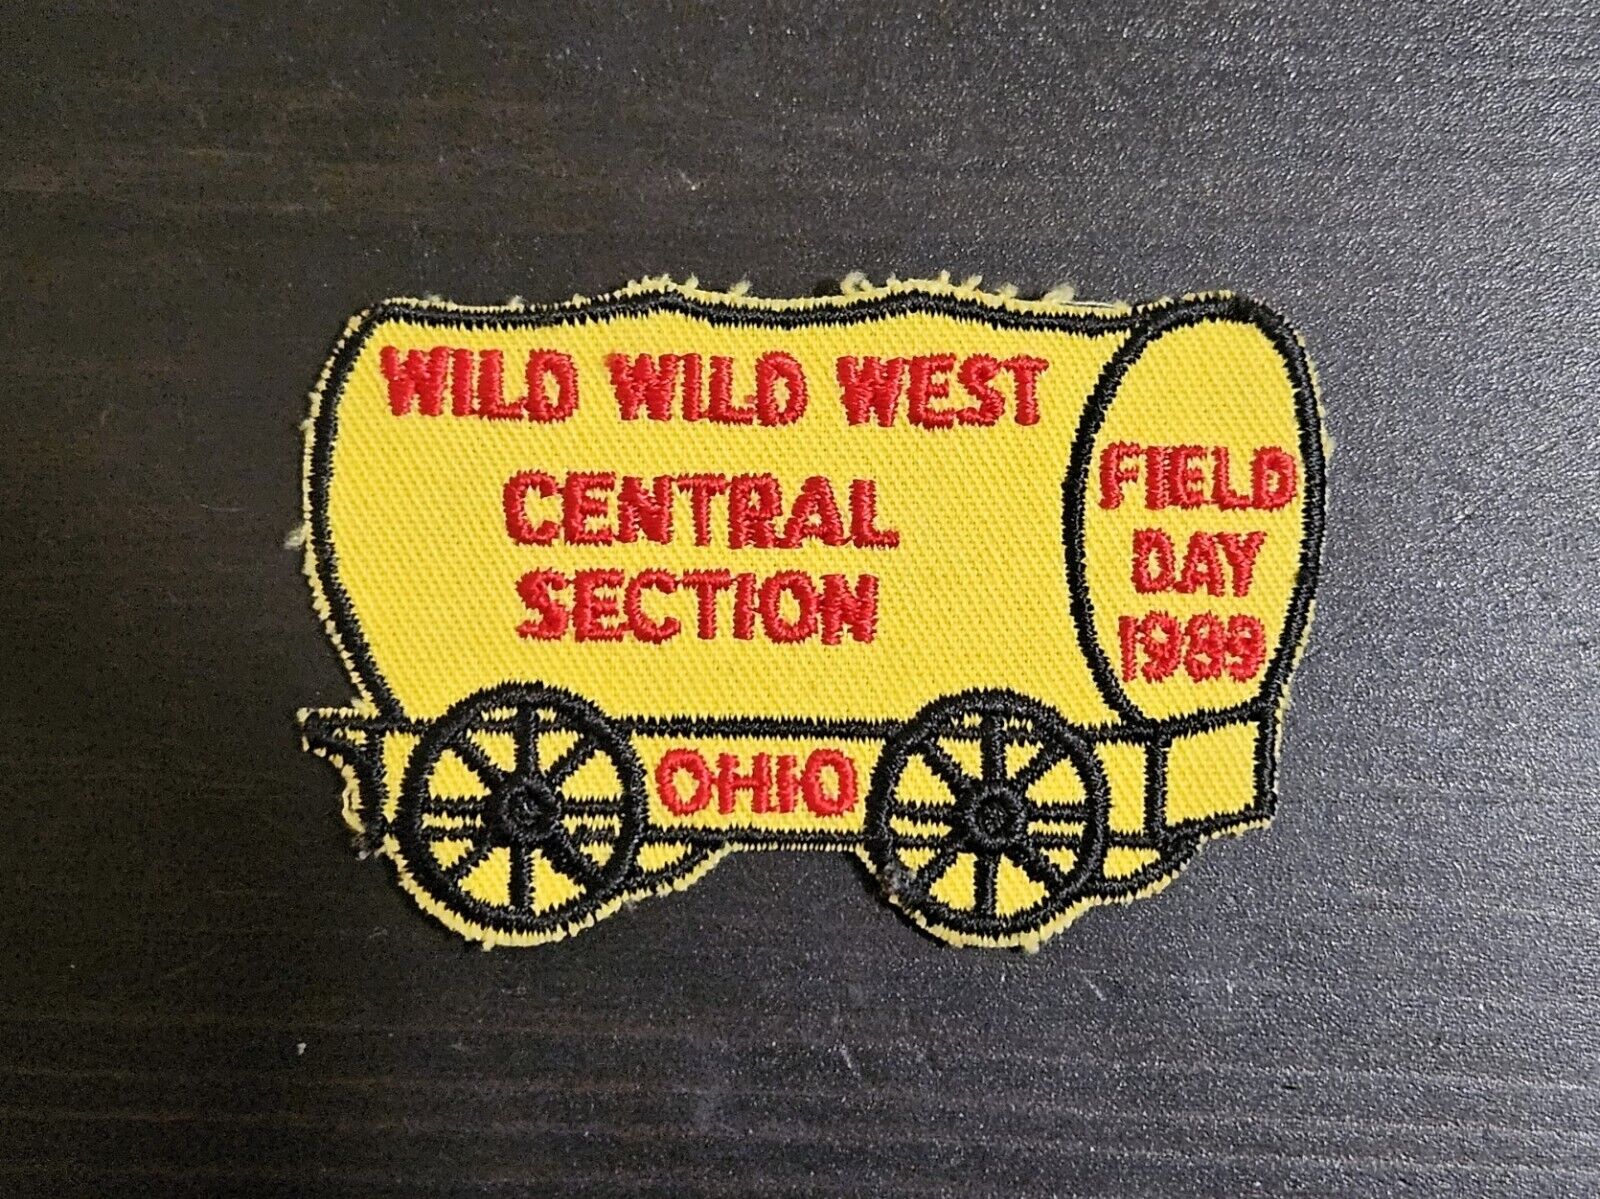 Ohio Central Section 1989 Royal Rangers Field Day Patch